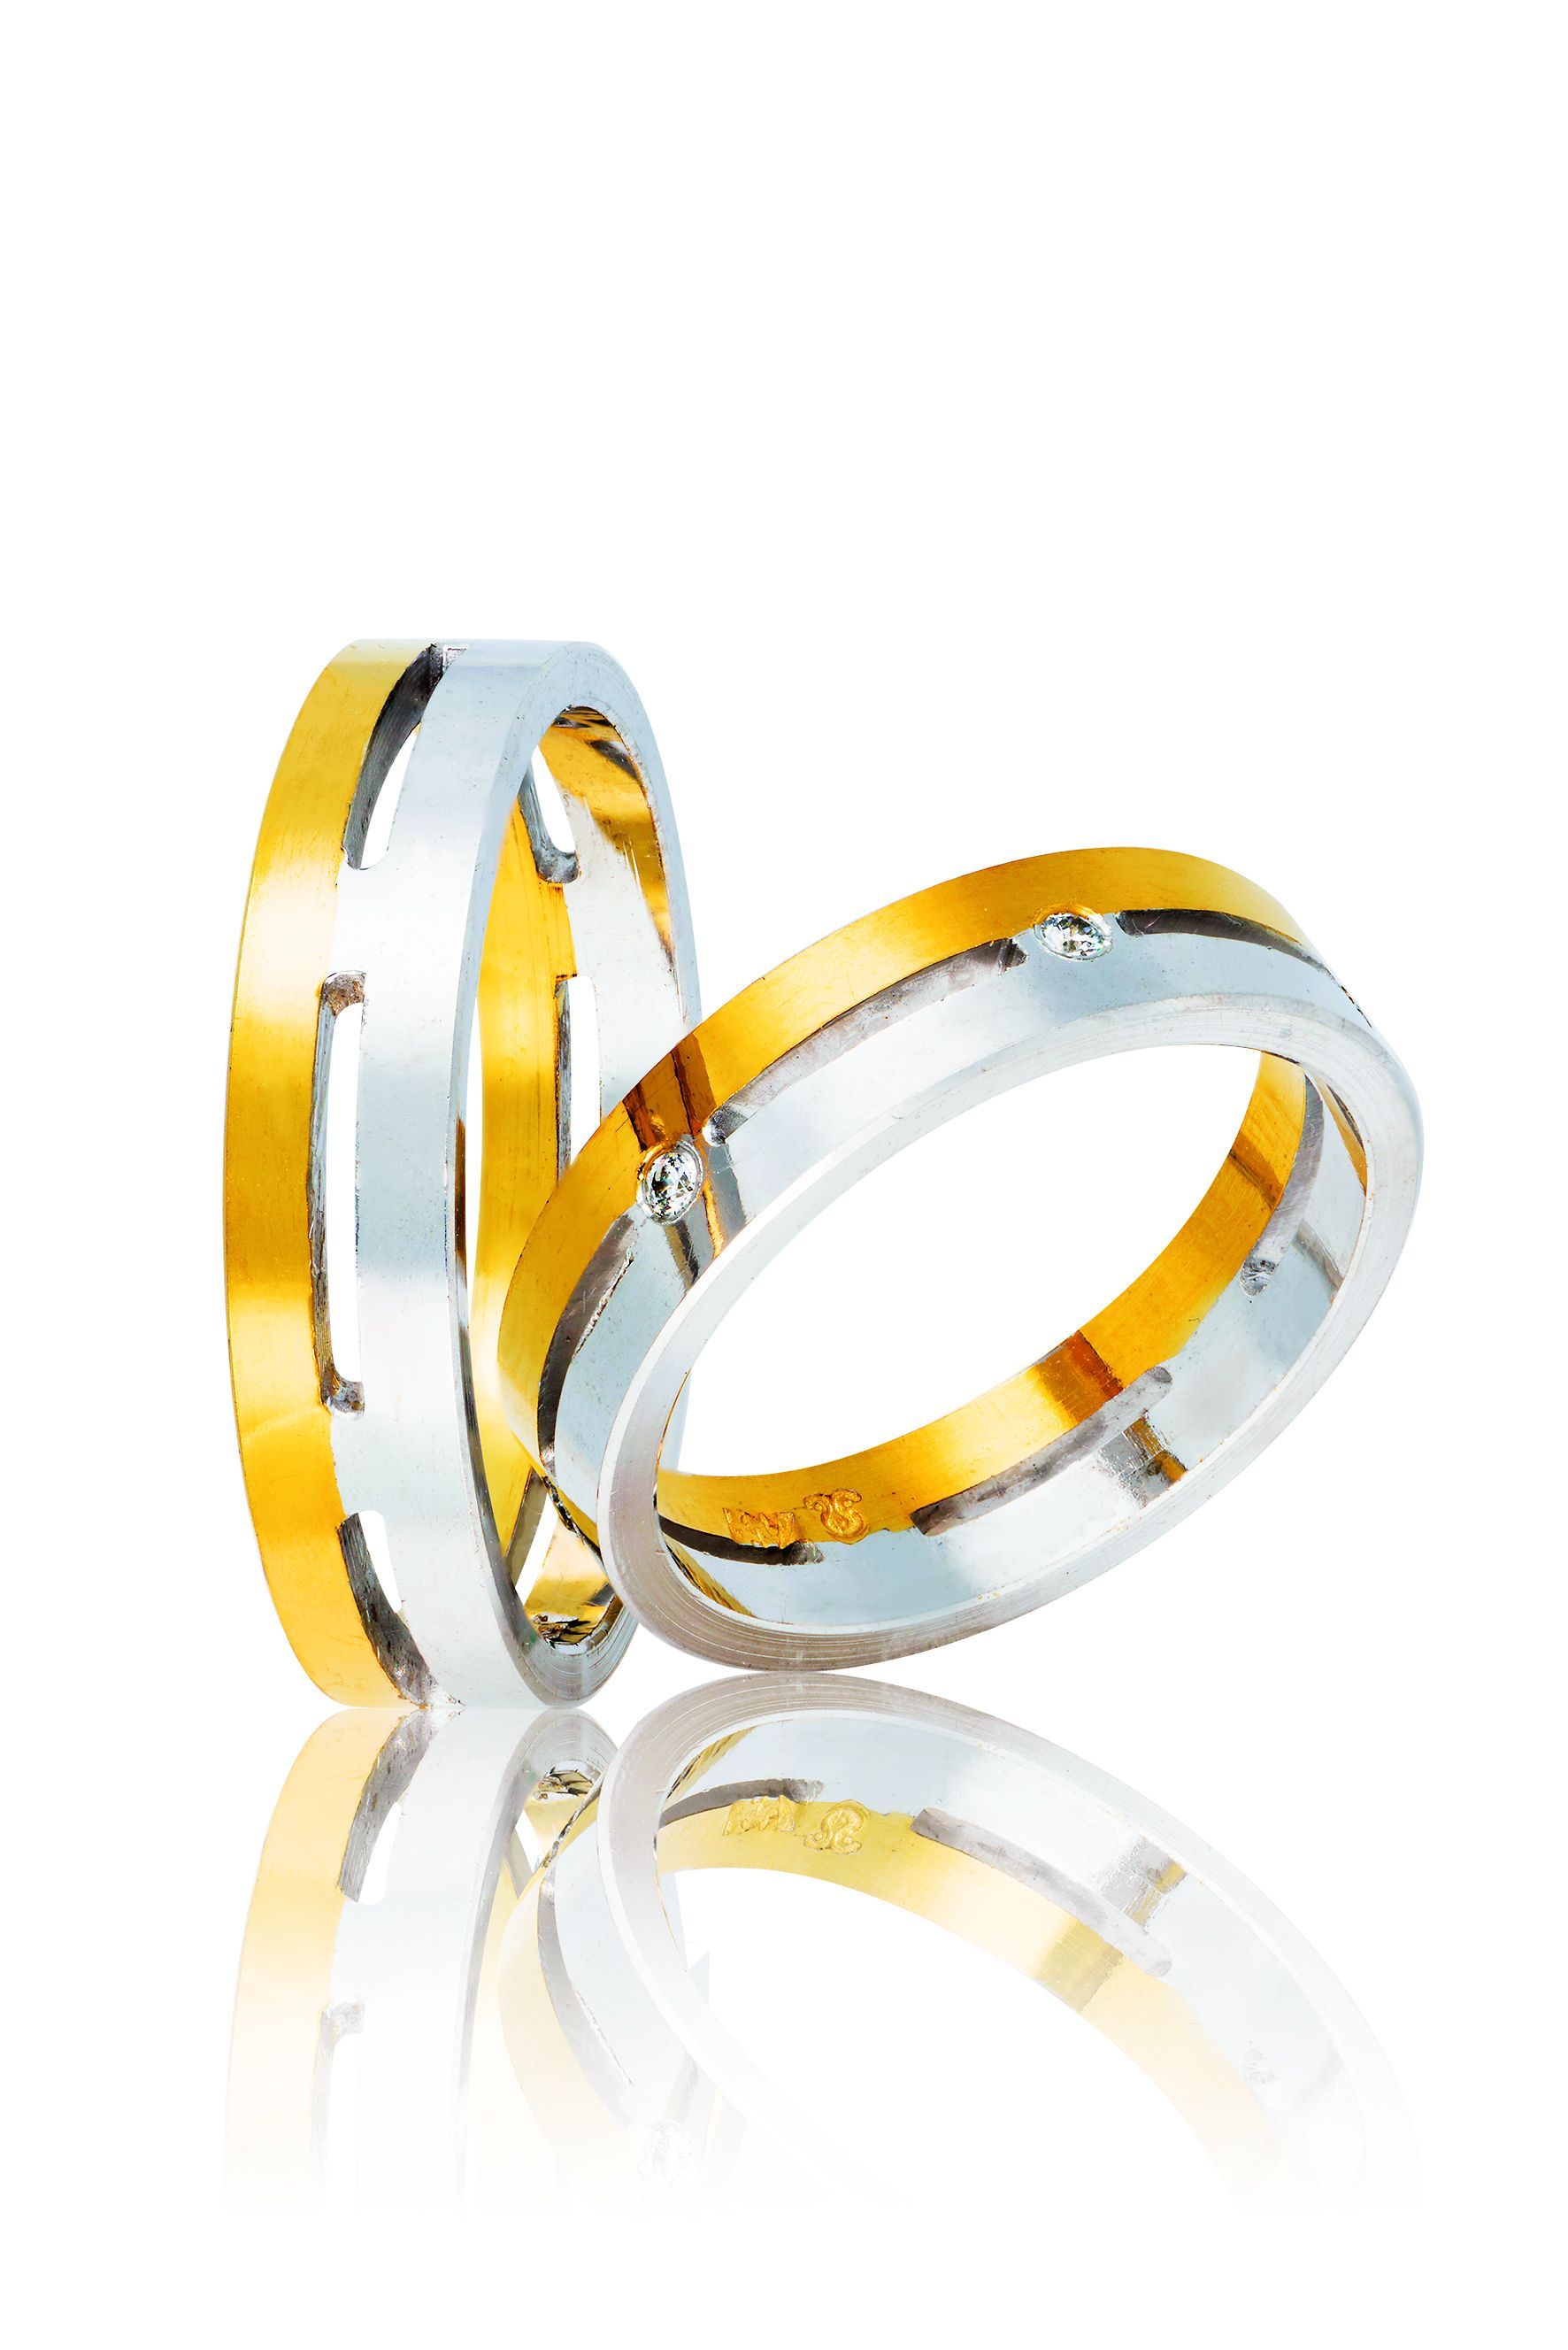 White gold & yellow gold wedding rings 5mm (code 4yw)